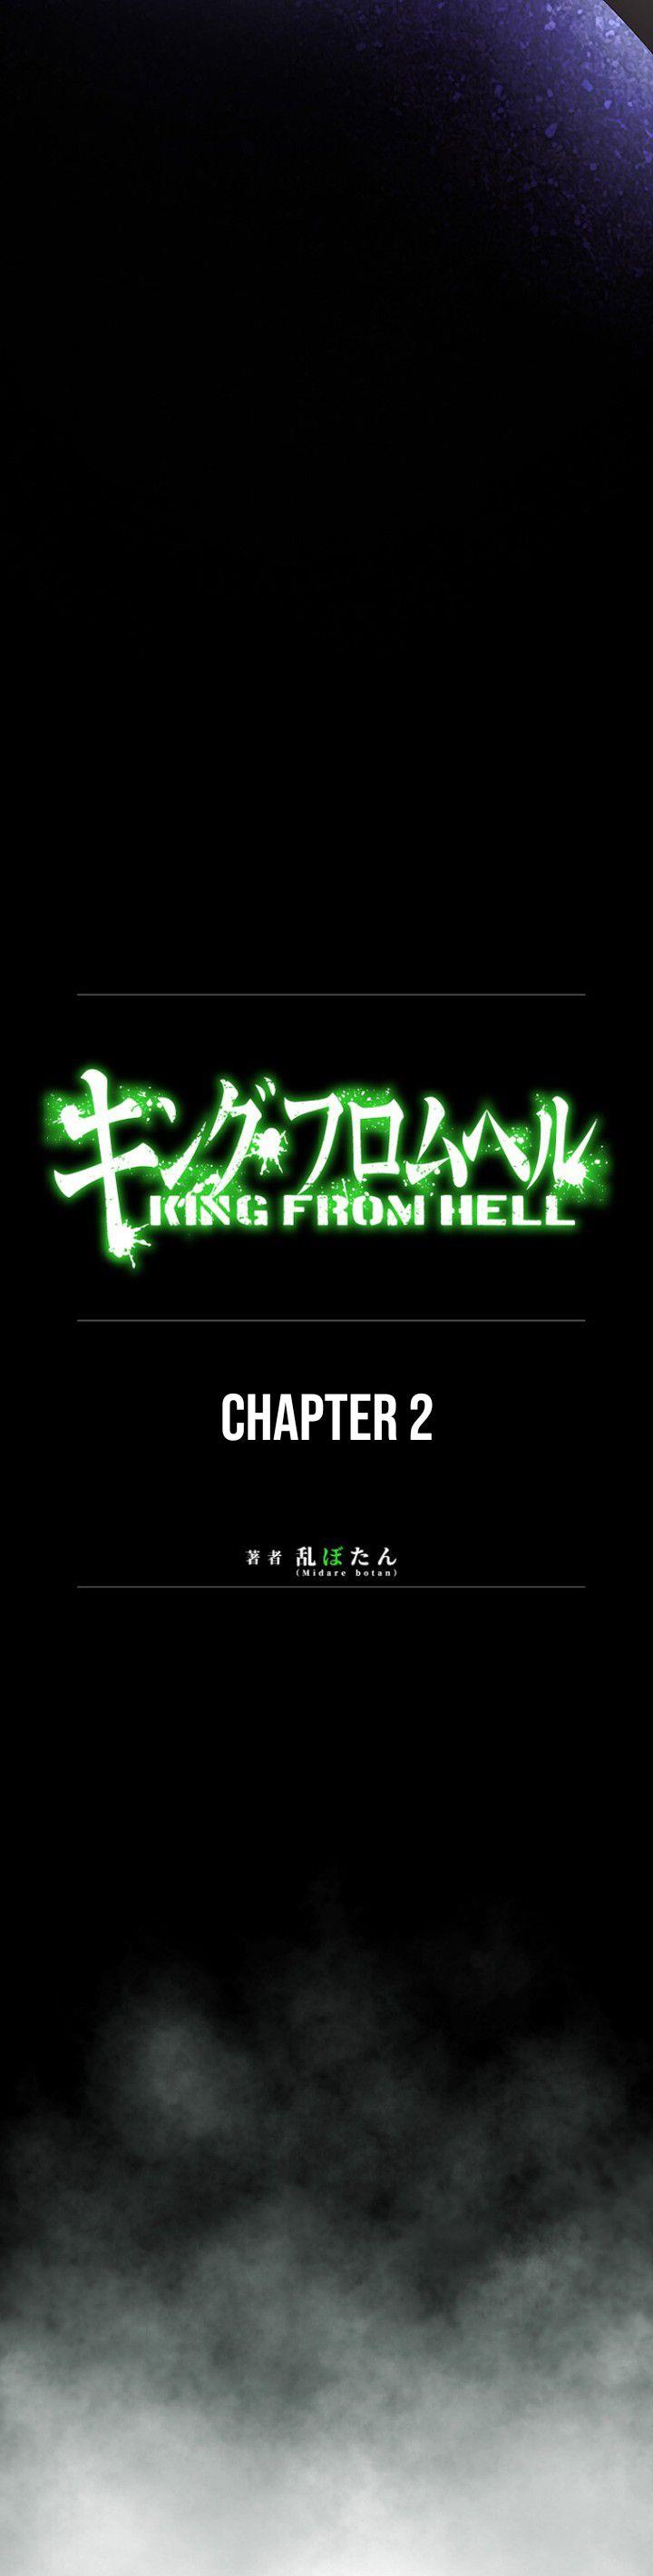 King From Hell Chapter 2